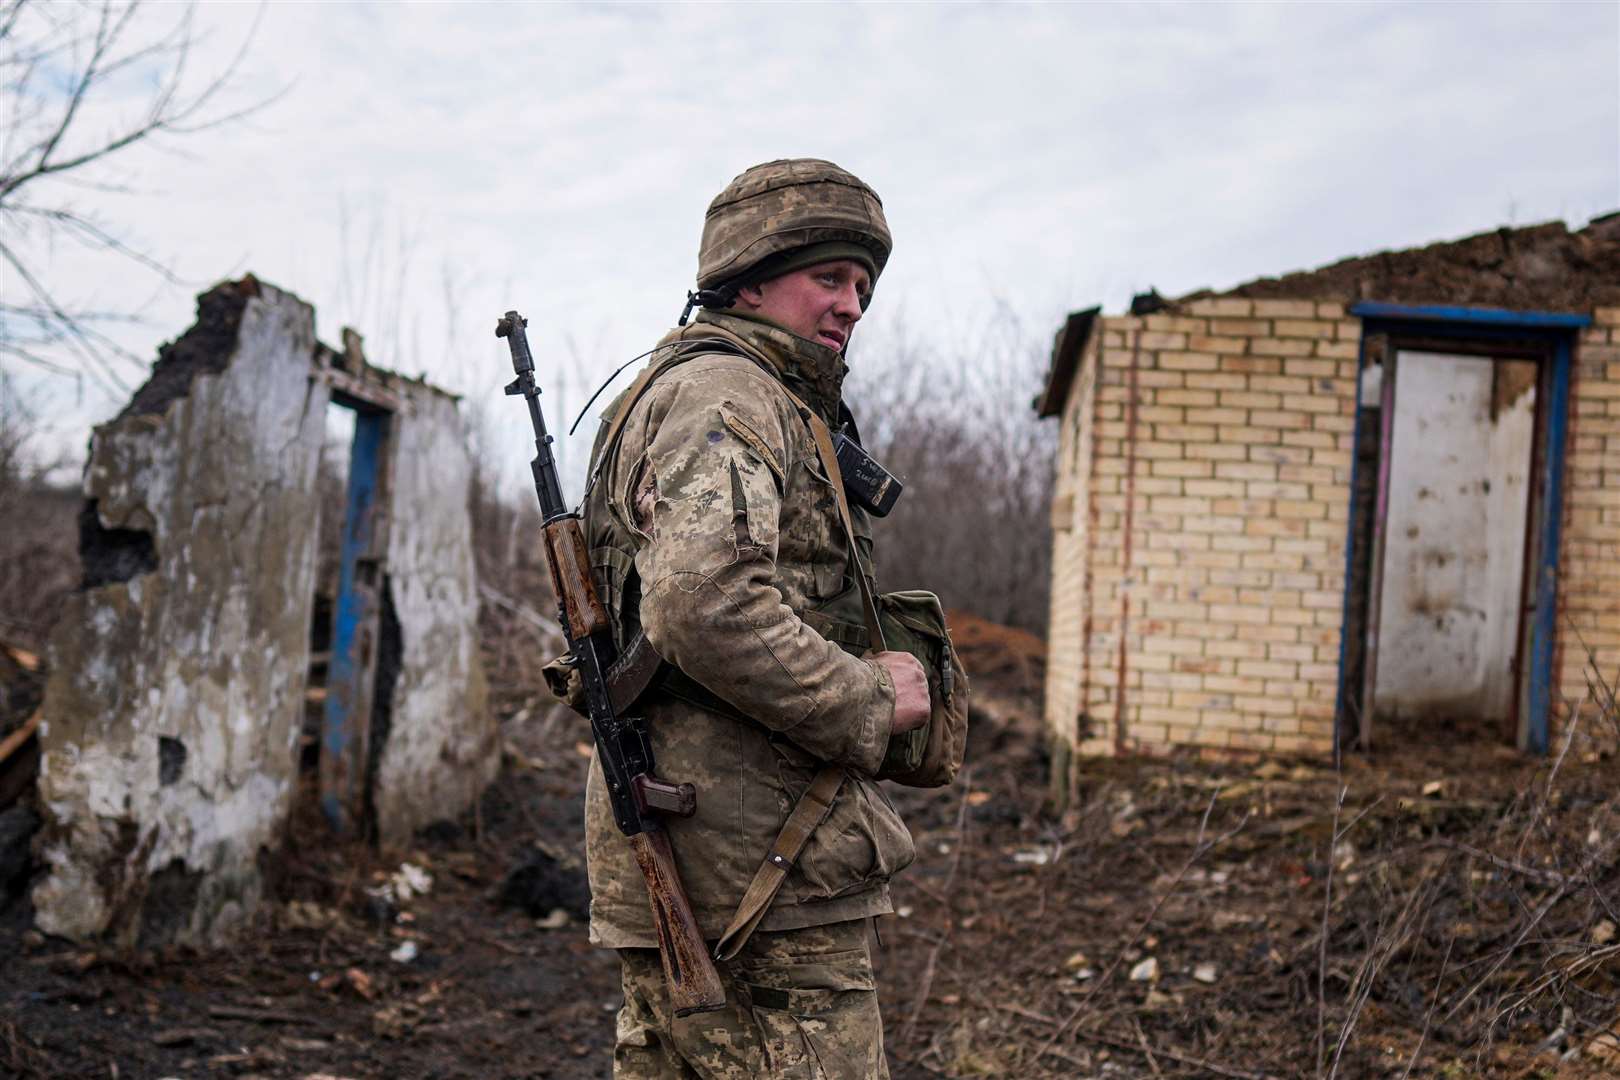 The body armour will help protect Ukraine's fighters